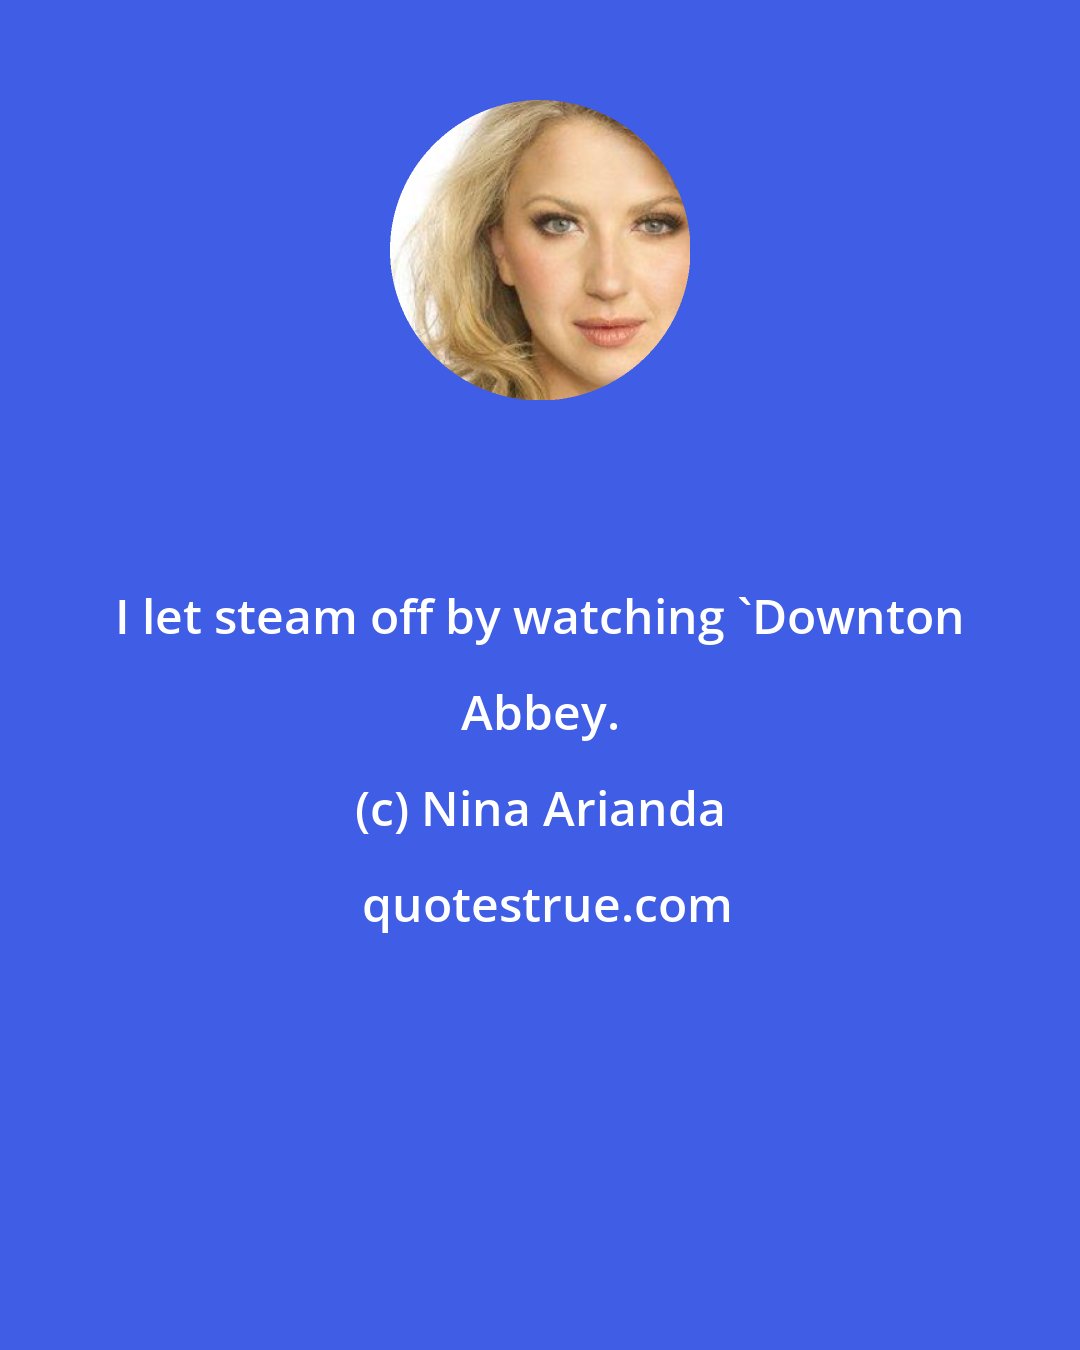 Nina Arianda: I let steam off by watching 'Downton Abbey.